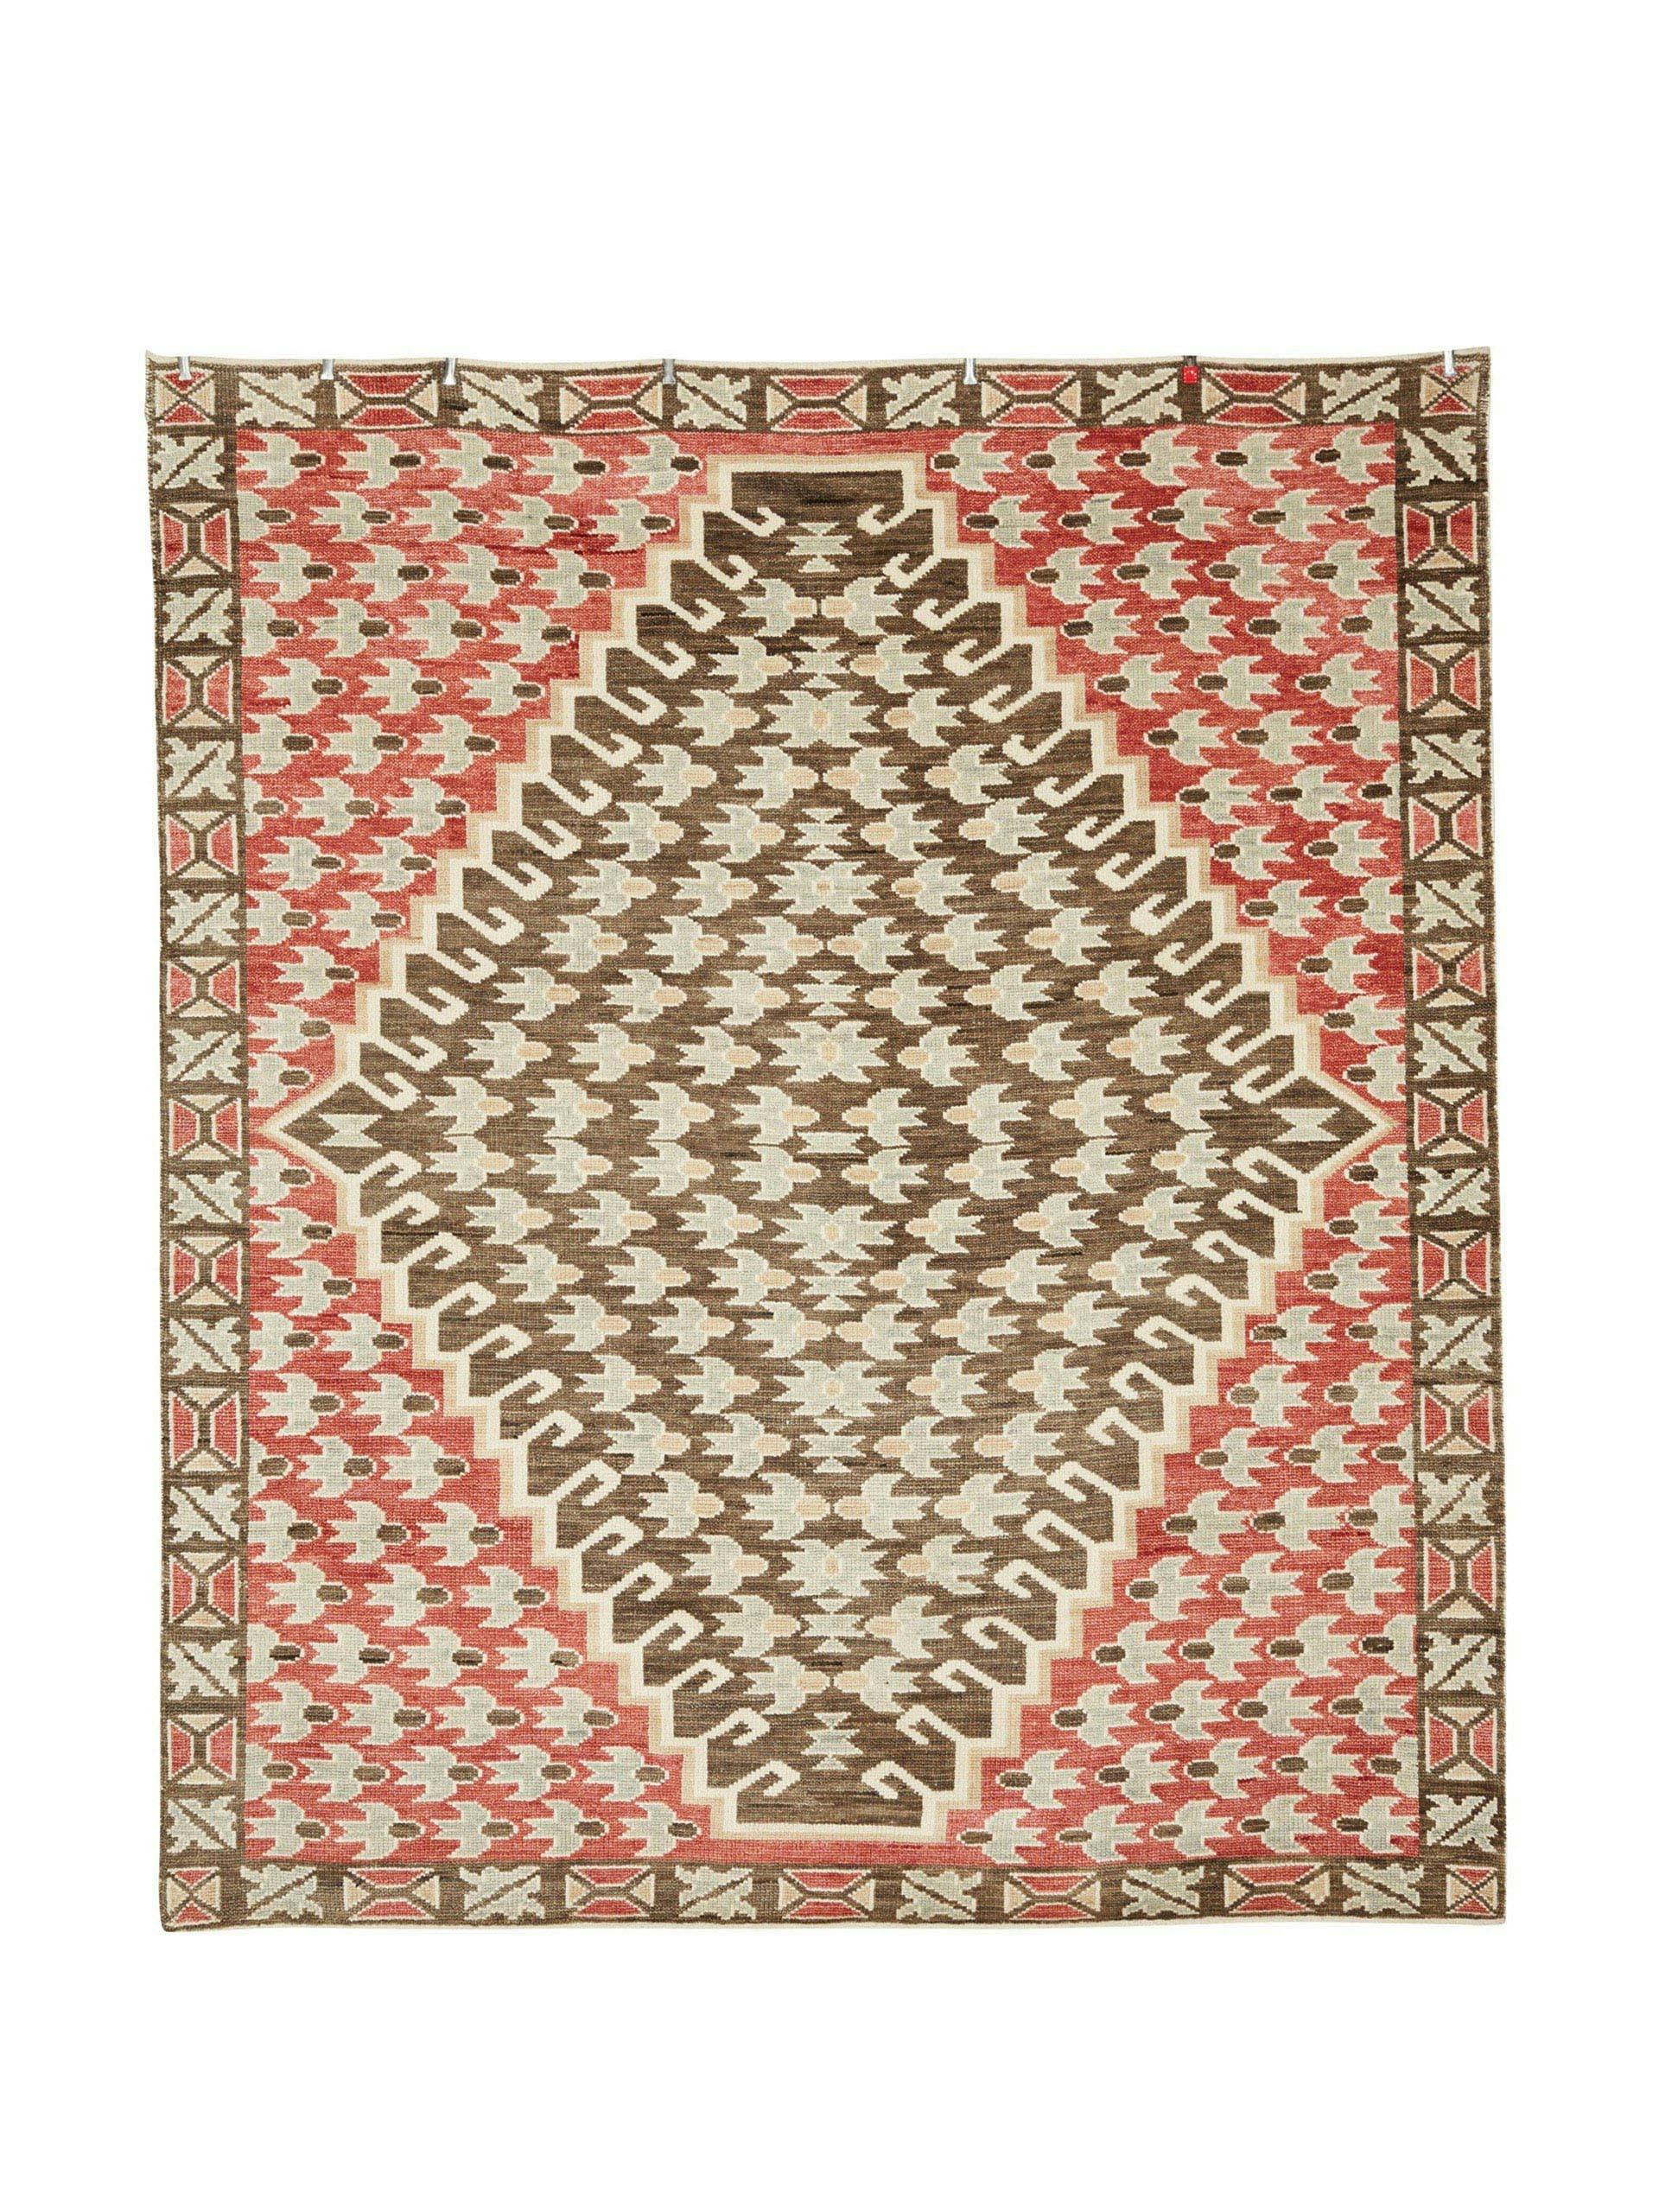 Hand-knotted geometric patterned rug